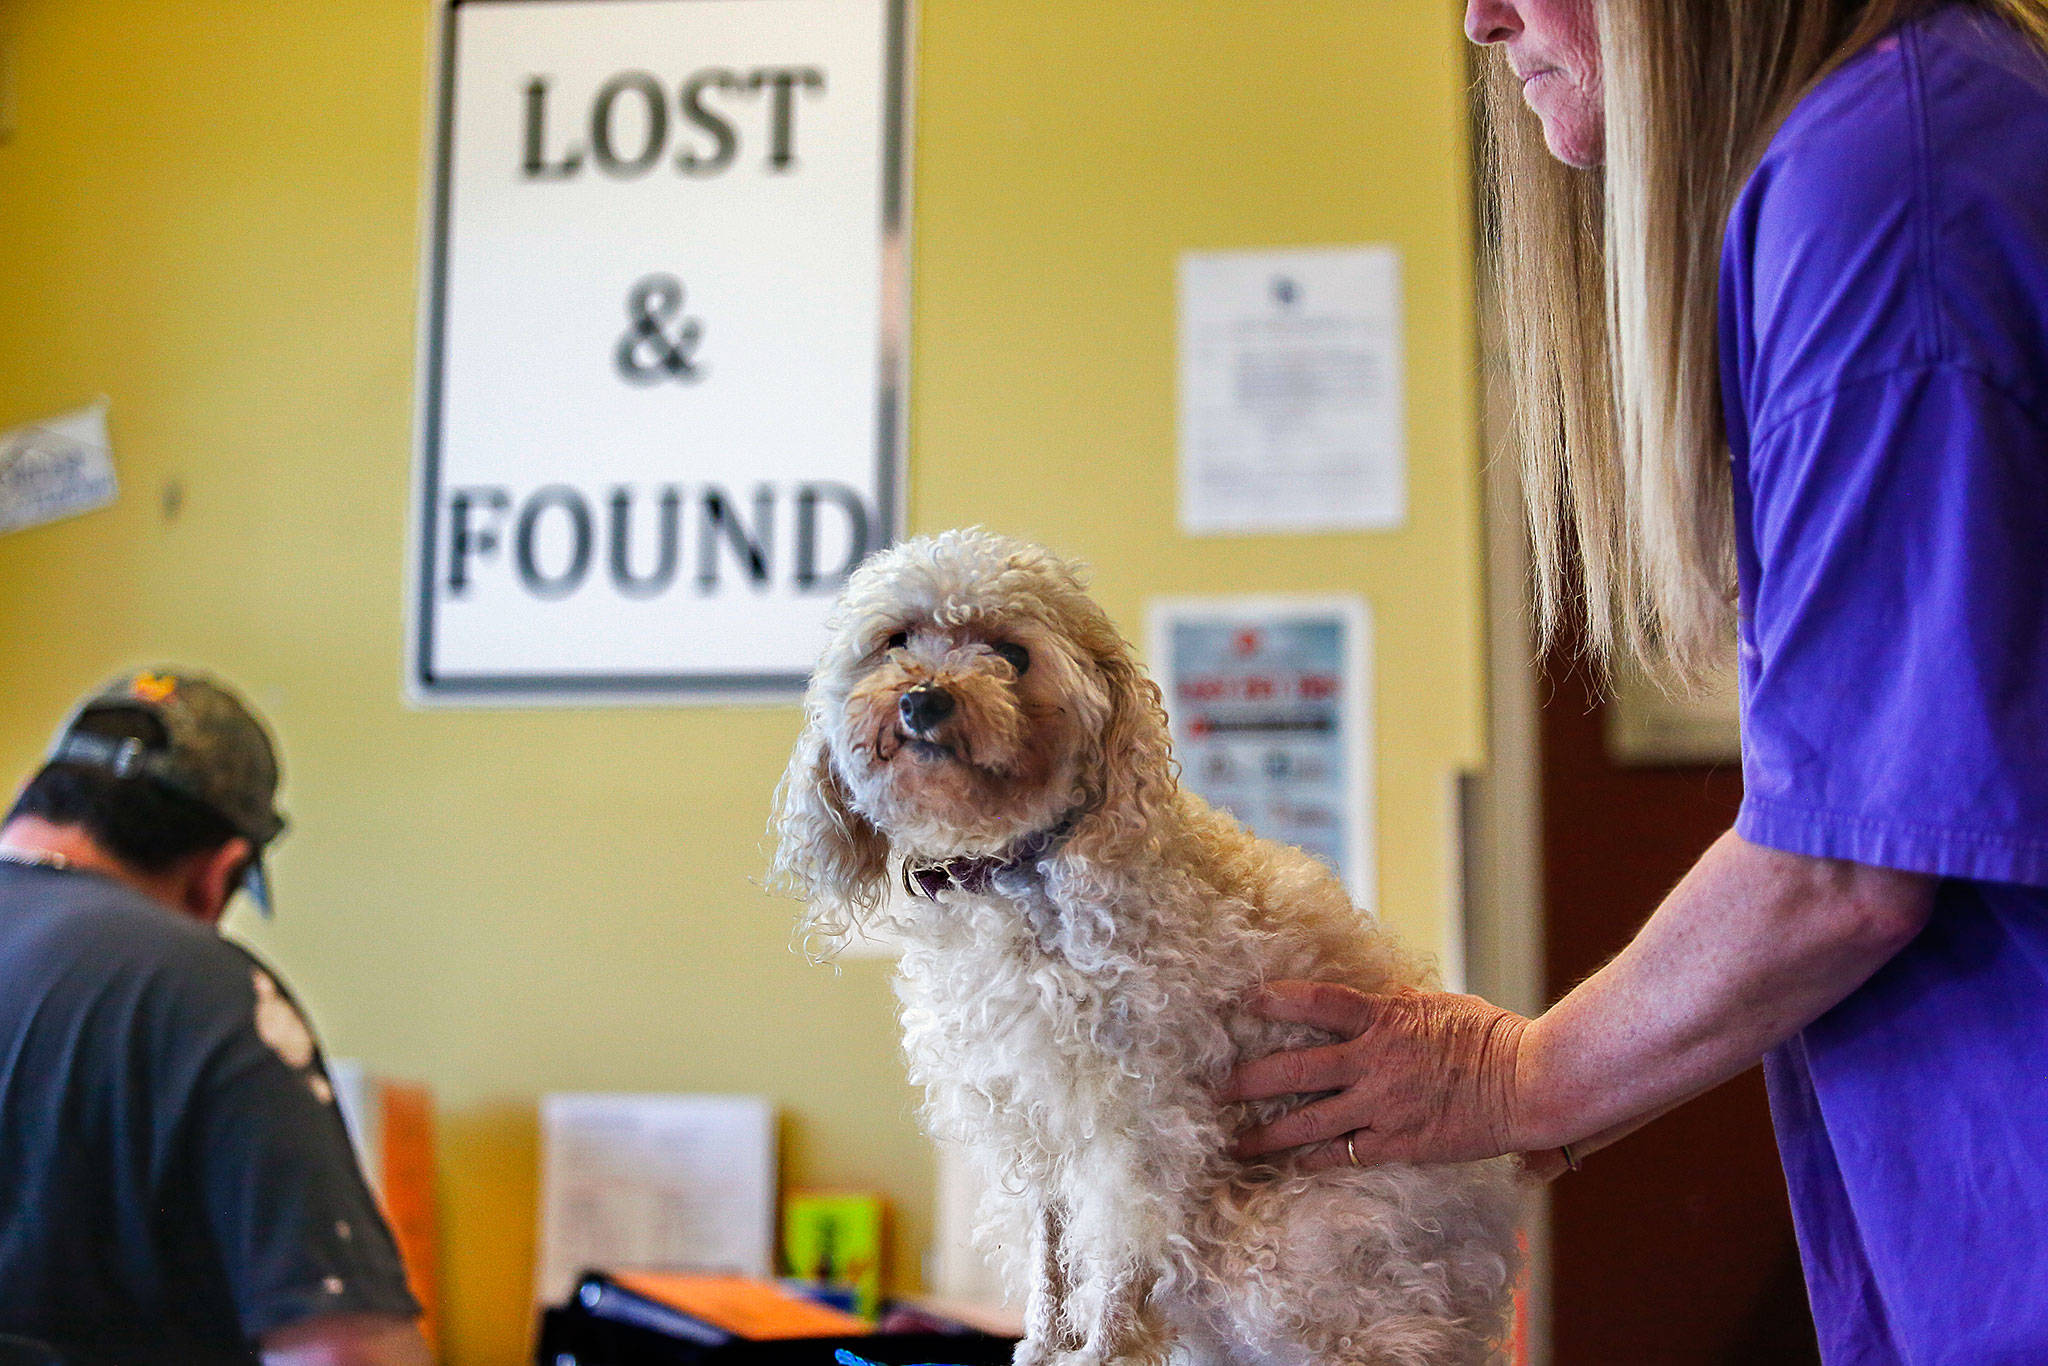 Everett Animal Shelter staffer Kim Mantyla deals with a lost poodle, Monday. P.J. is estimated to be 10 to 11 years old. The Everett Animal Shelter is launching a senior dog foster program to get its elderly dogs into temporary homes. The current foster program had only included puppies, kittens and adult cats.(Dan Bates / The Herald)